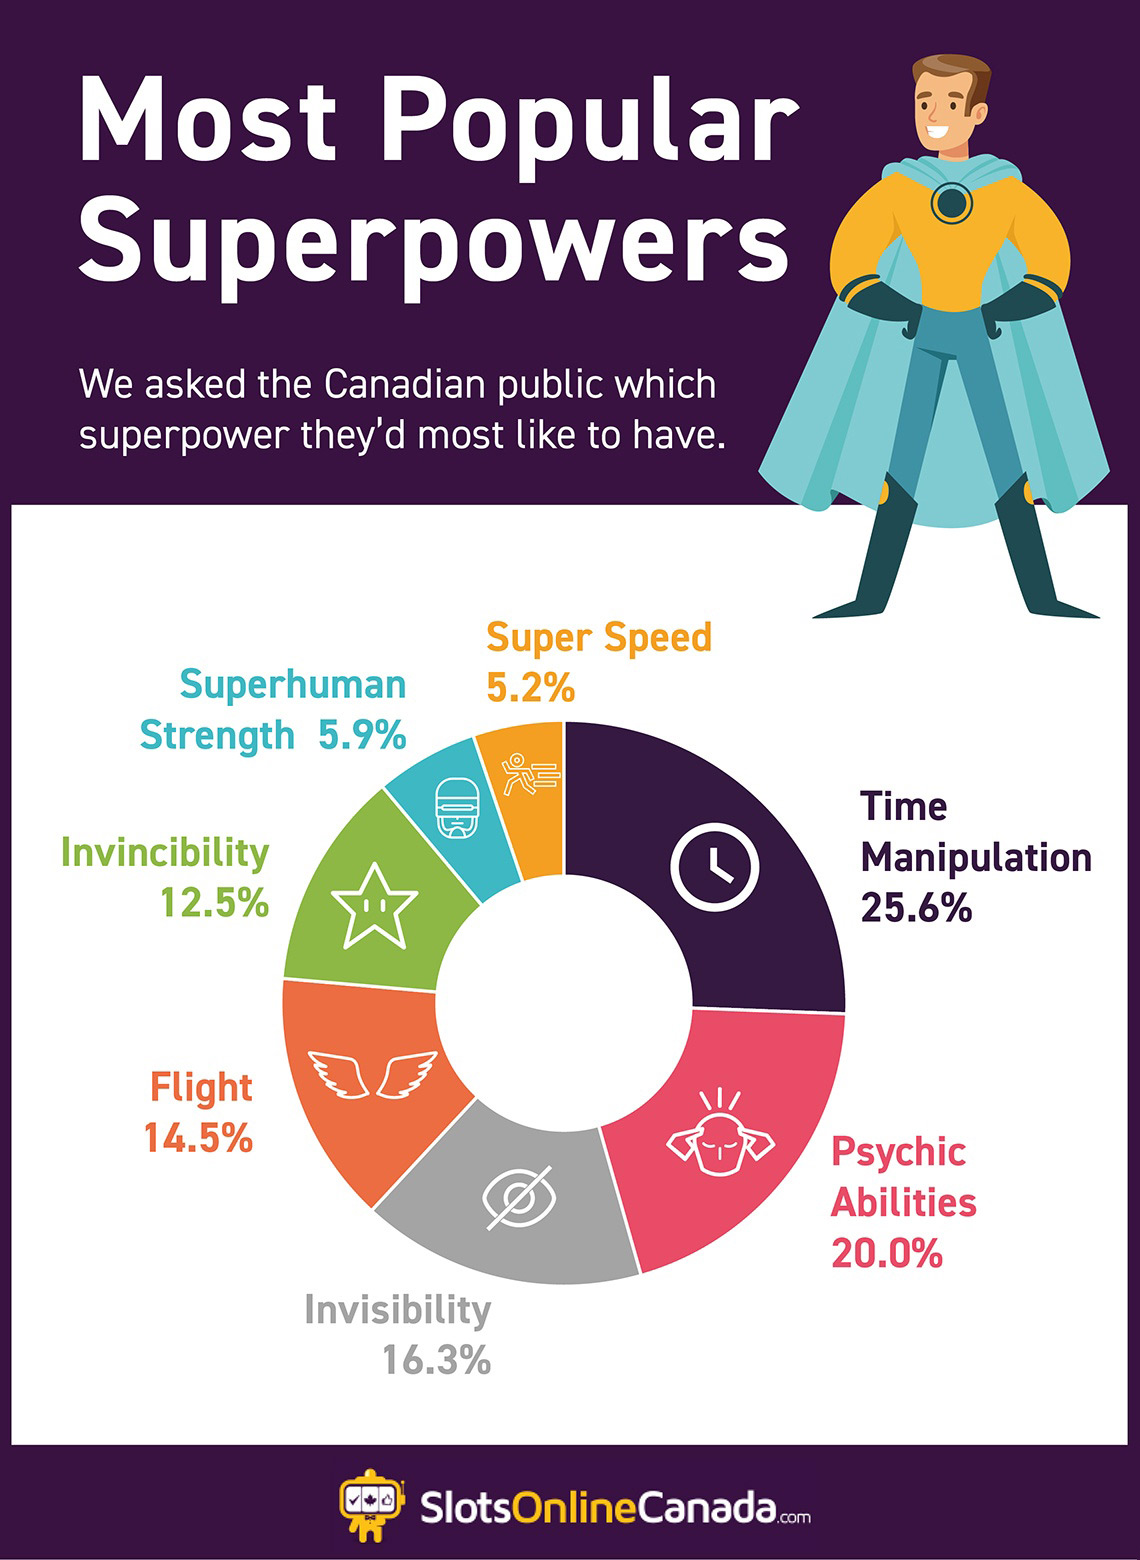 Unmasking Canada's superpower preferences